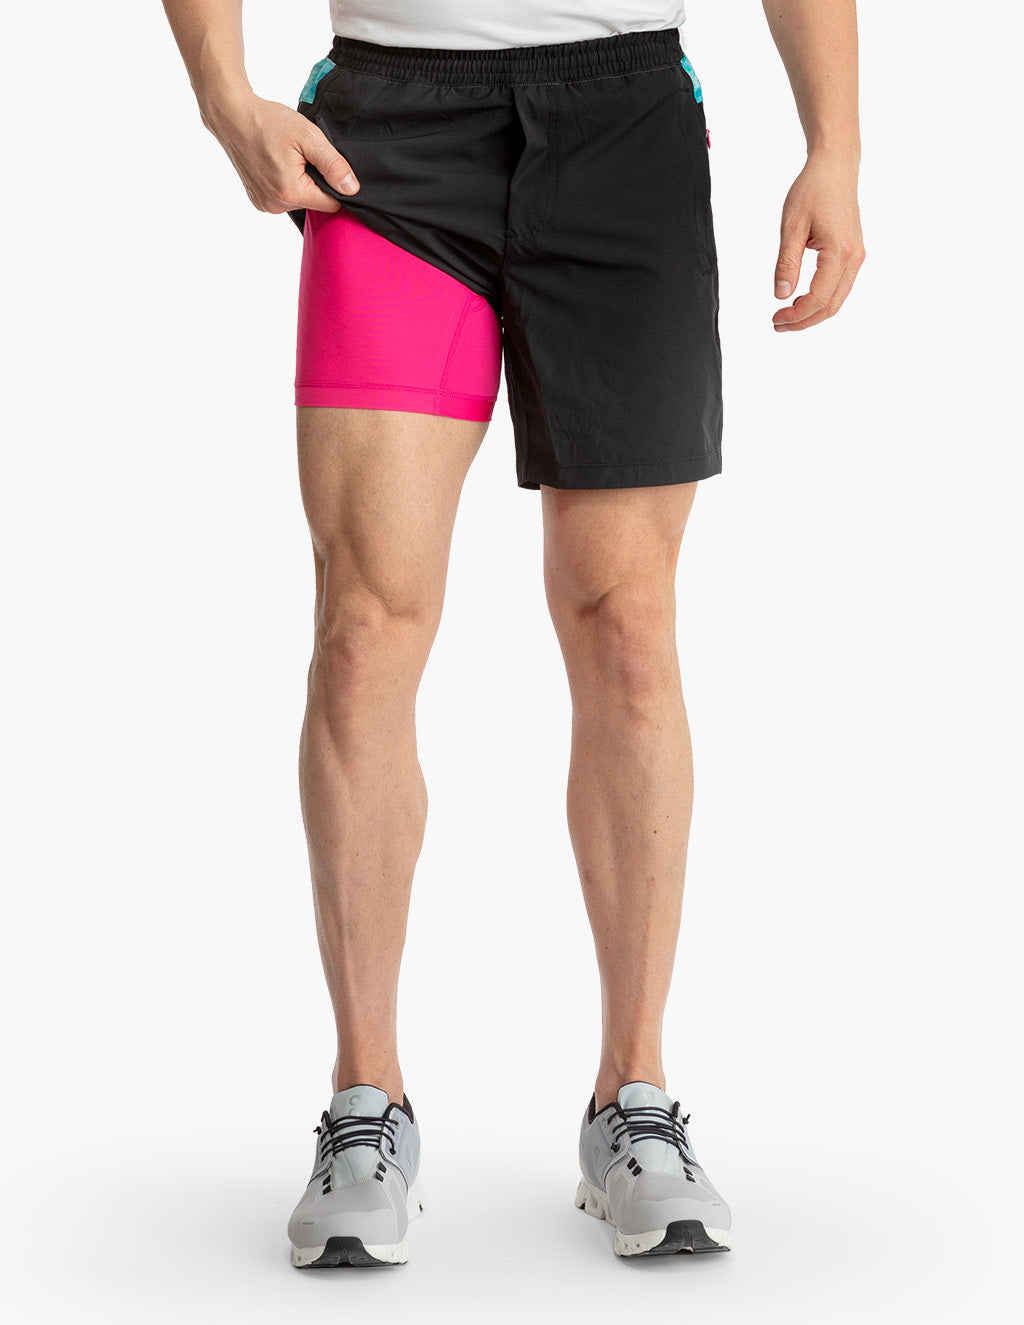 Vitality Activate Volley Short - Women's Black Yoga Shorts with Lime  Contrast